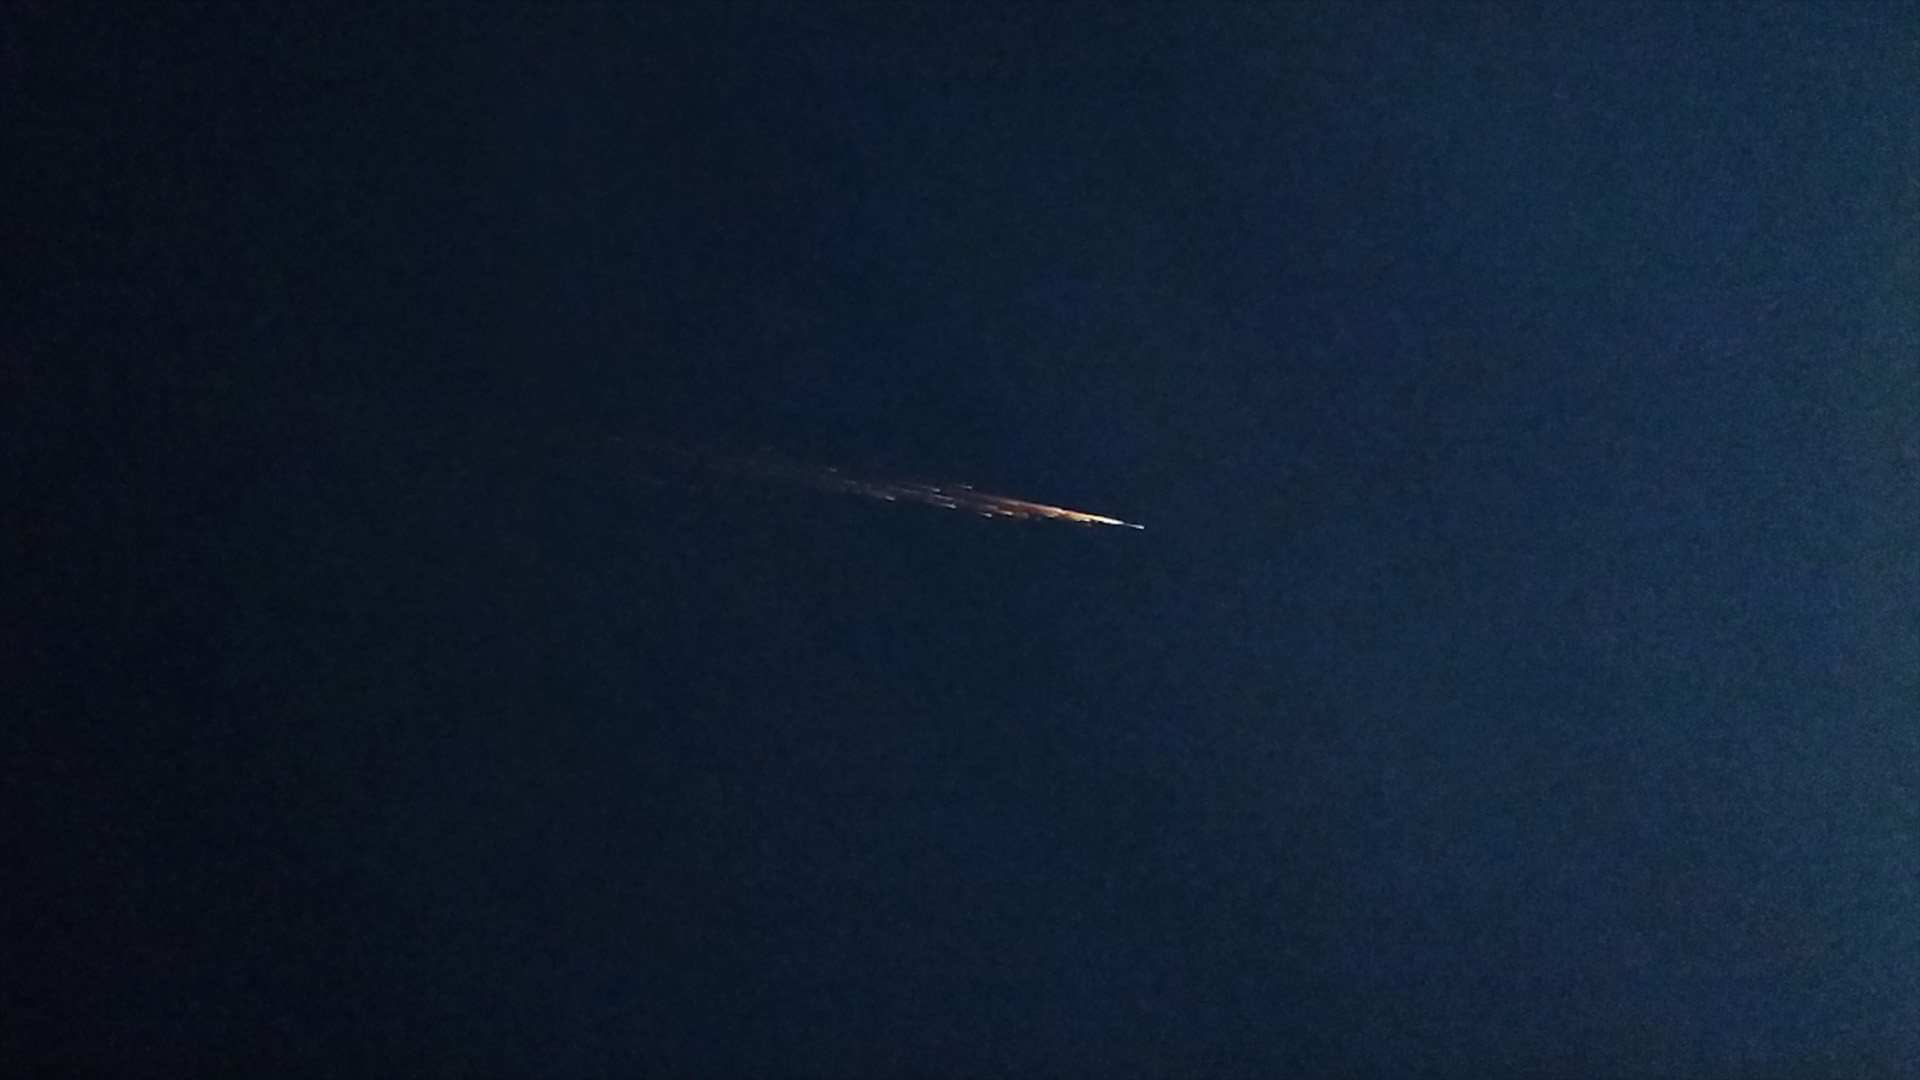 Jennifer M. captured this photo of a fireball in Earth's skies from Phelan, California on April 2, 2024 and forwarded it to the American Meteor Society. The fireball was caused by the reentry of China's Shenzhou 15 orbital module, experts say.